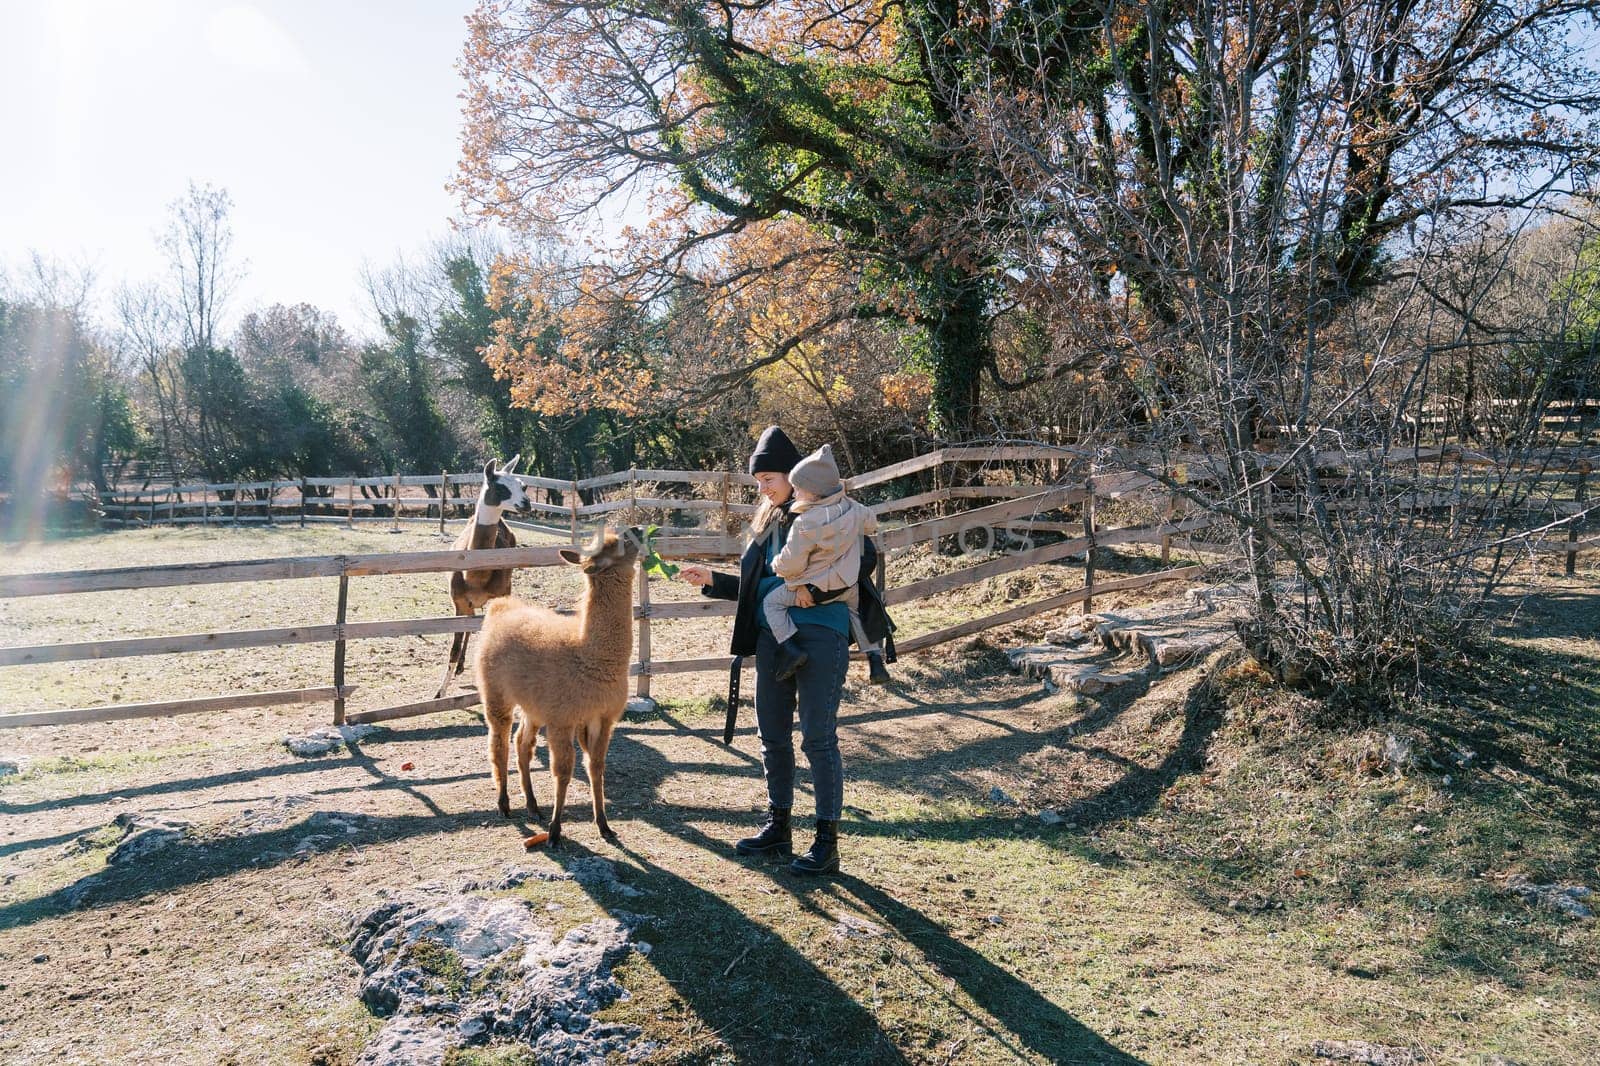 Mom with a little girl in her arms feeds green branches to a llama in the park. High quality photo